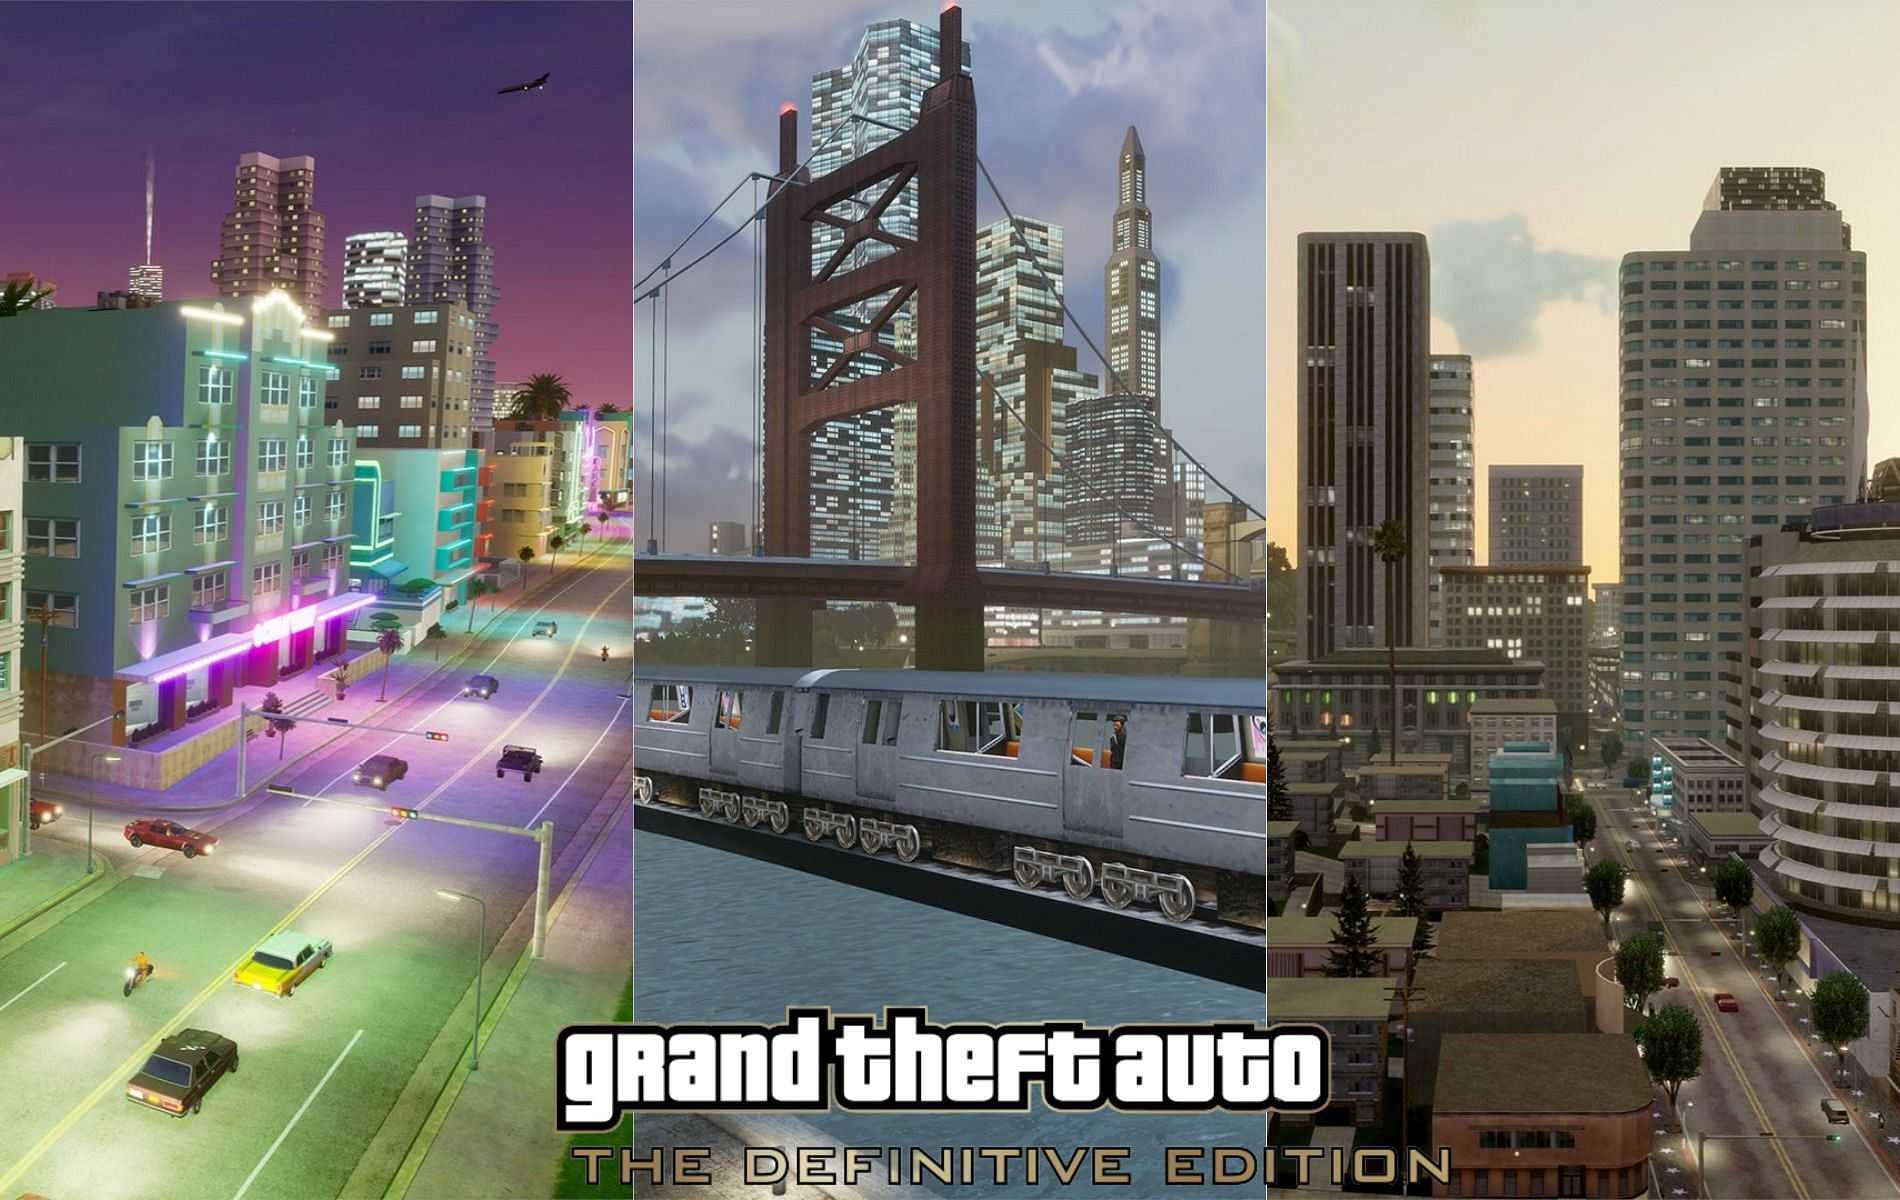 Gta the trilogy the definitive edition. GTA Definitive Edition. GTA 4 Definitive Edition. ГТА the Trilogy Definitive Edition. Grand Theft auto the Trilogy ps4.